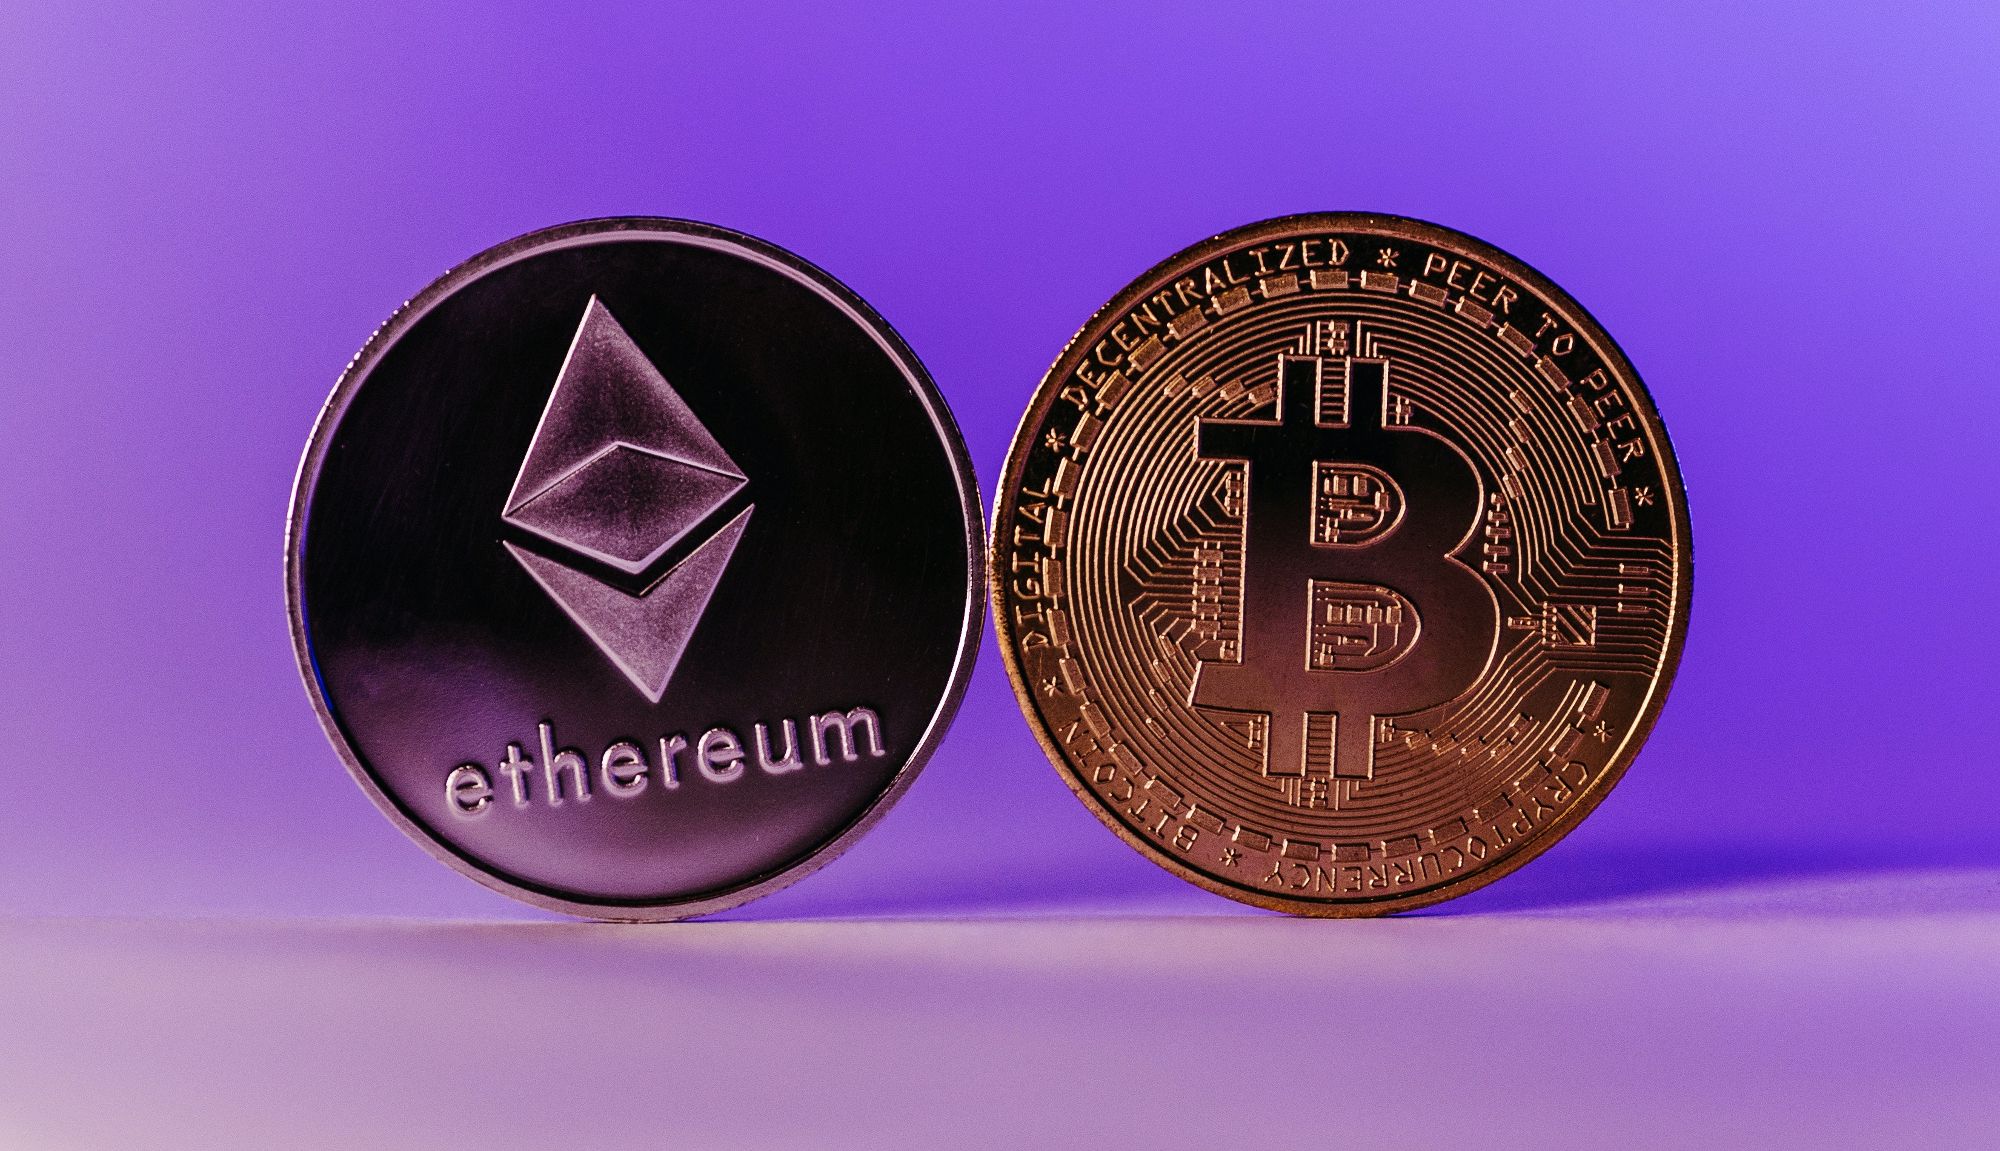 ethereum and bitcoin coins side by side on purple background